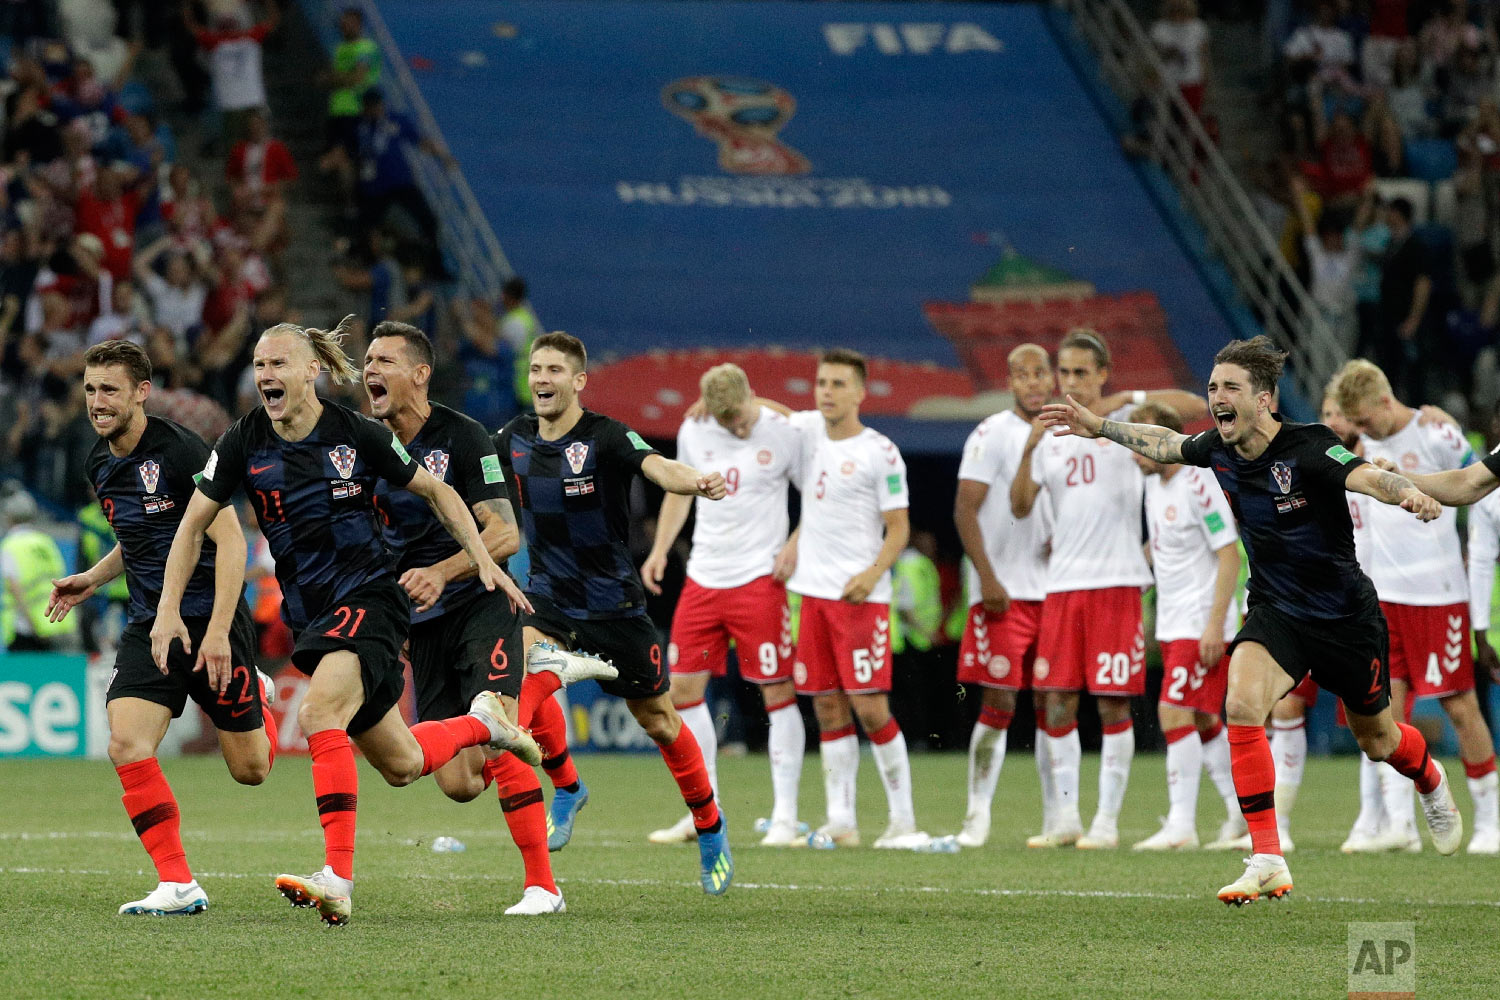  Croatians players celebrate after the penalties during the round of 16 match between Croatia and Denmark at the 2018 soccer World Cup in the Nizhny Novgorod Stadium, in Nizhny Novgorod, Russia, Sunday, July 1, 2018. Croatia eliminates Denmark 3-2 on